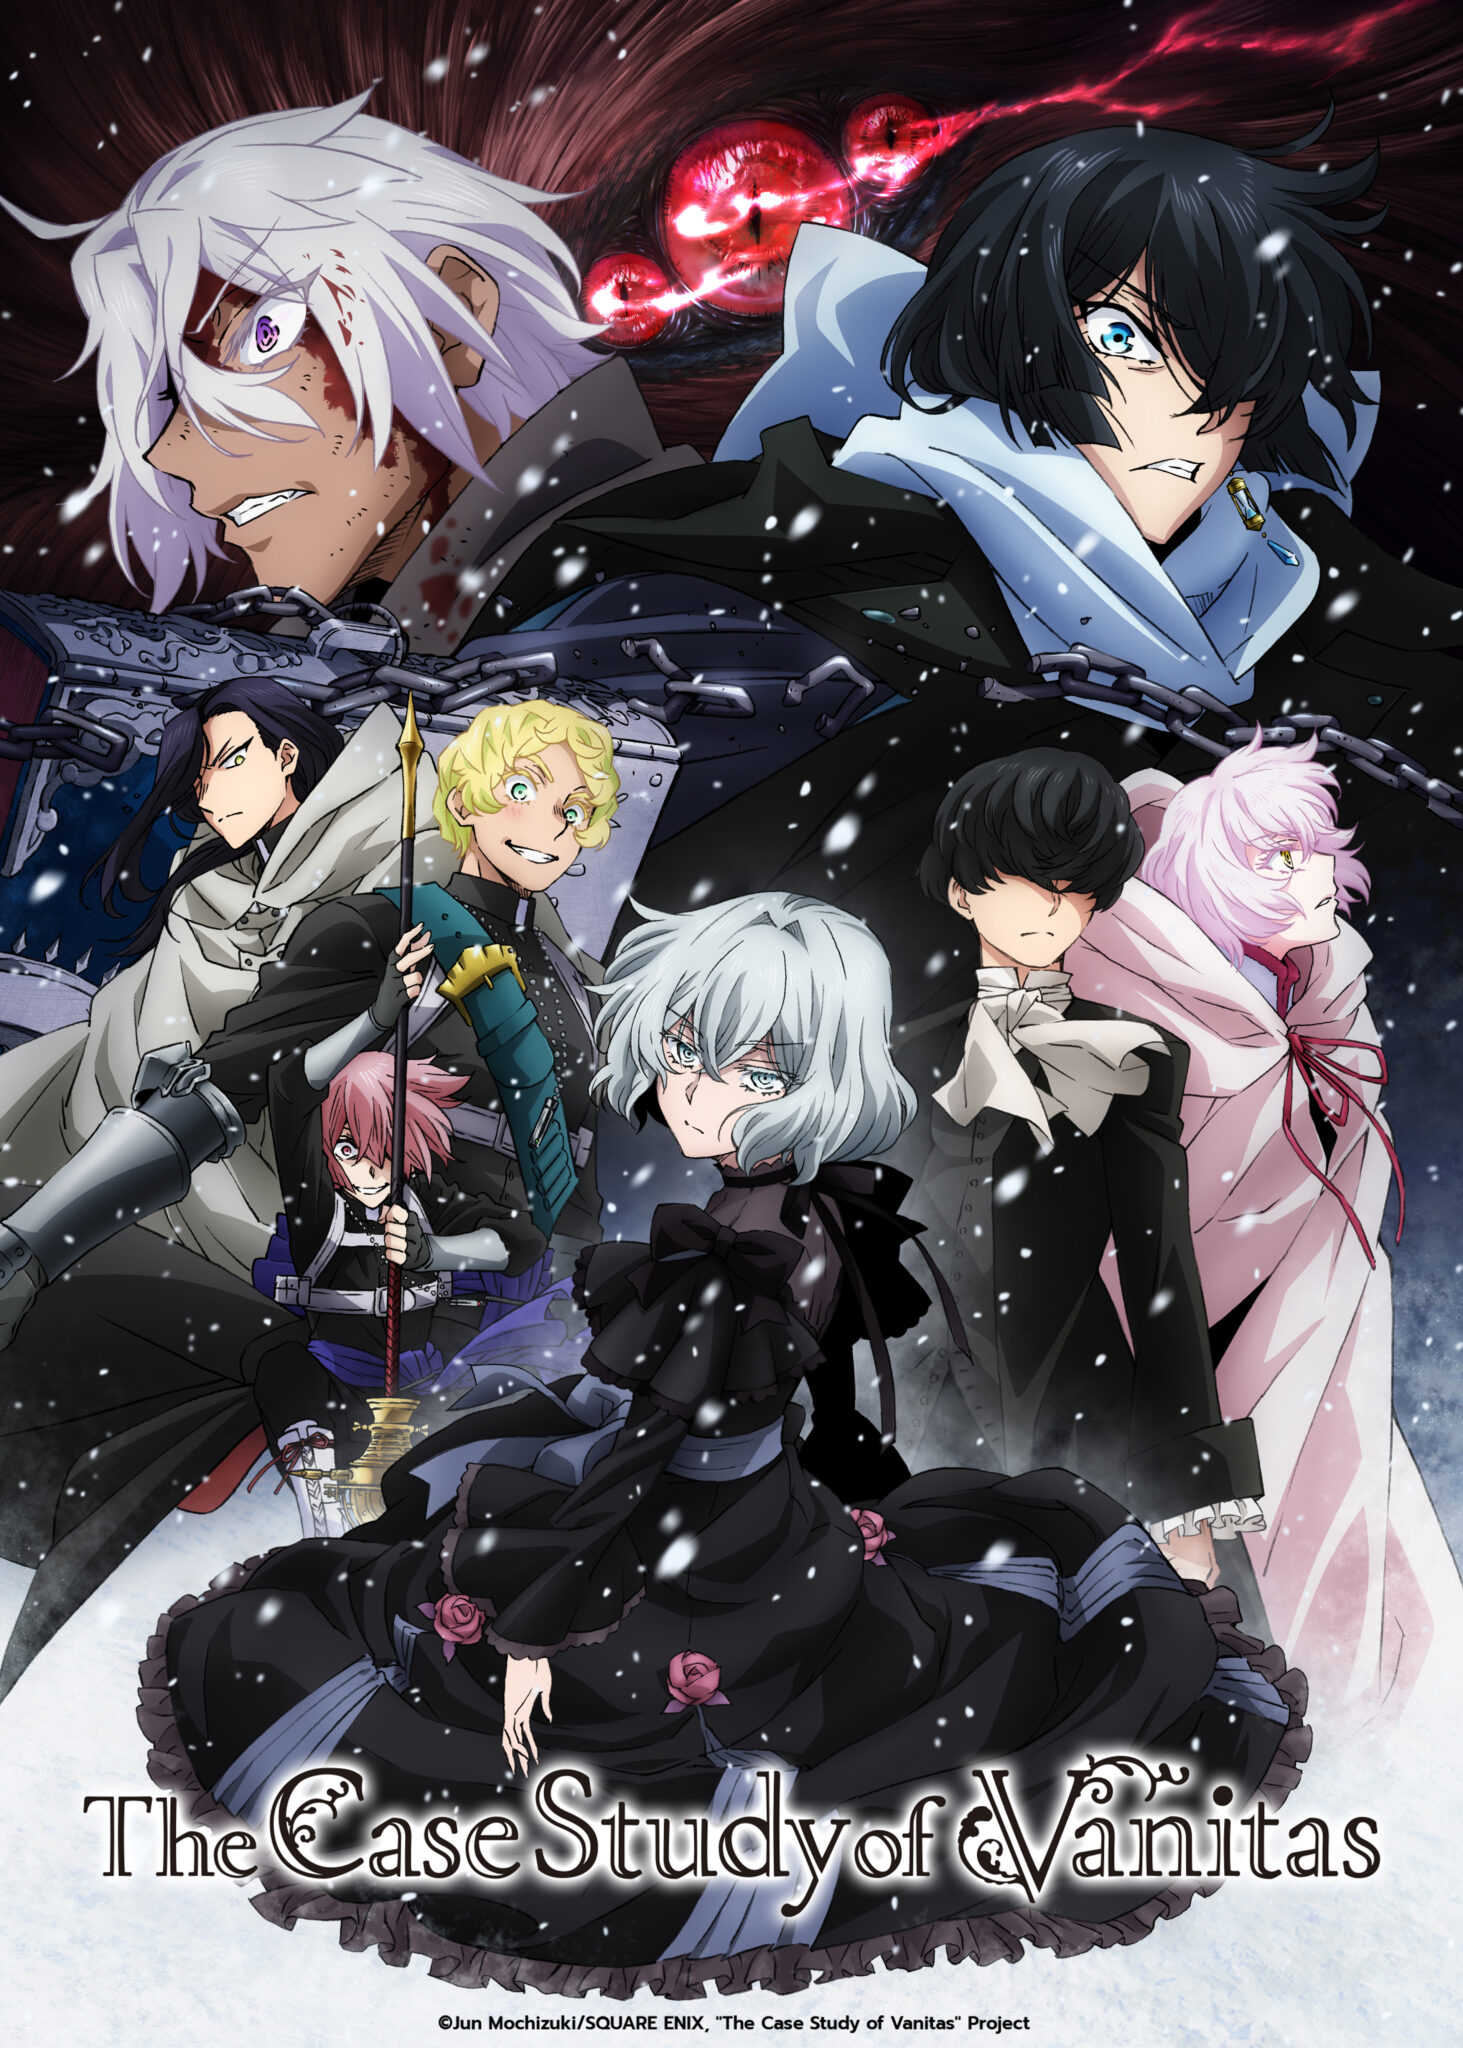 Funimation To Simulcast Endride, Shōnen Maid, 4 Others - Anime Herald